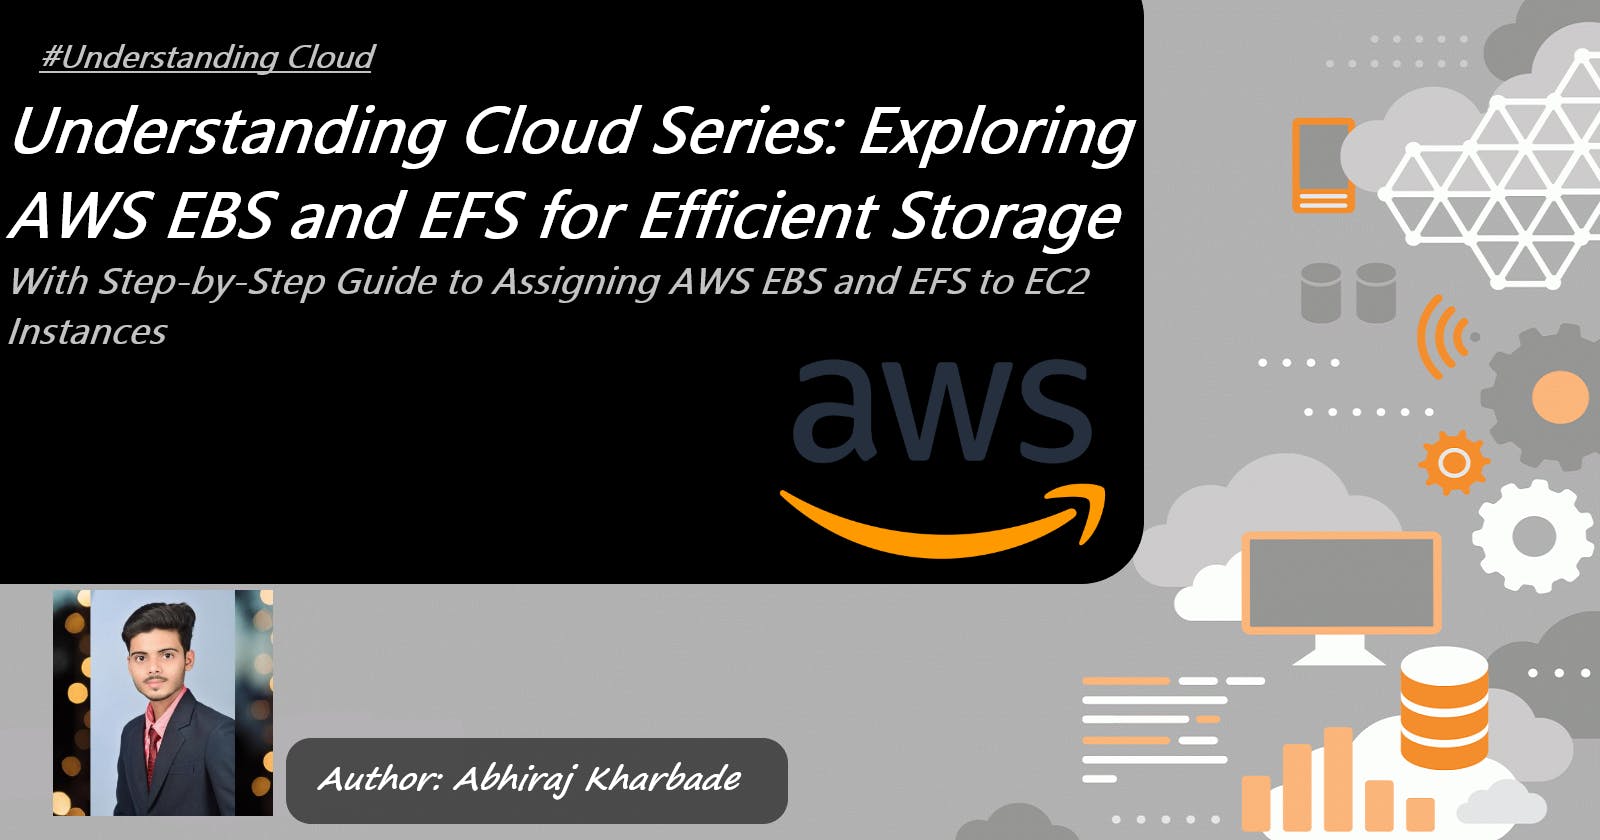 Understanding Cloud Series: Exploring AWS EBS and EFS for Efficient Storage